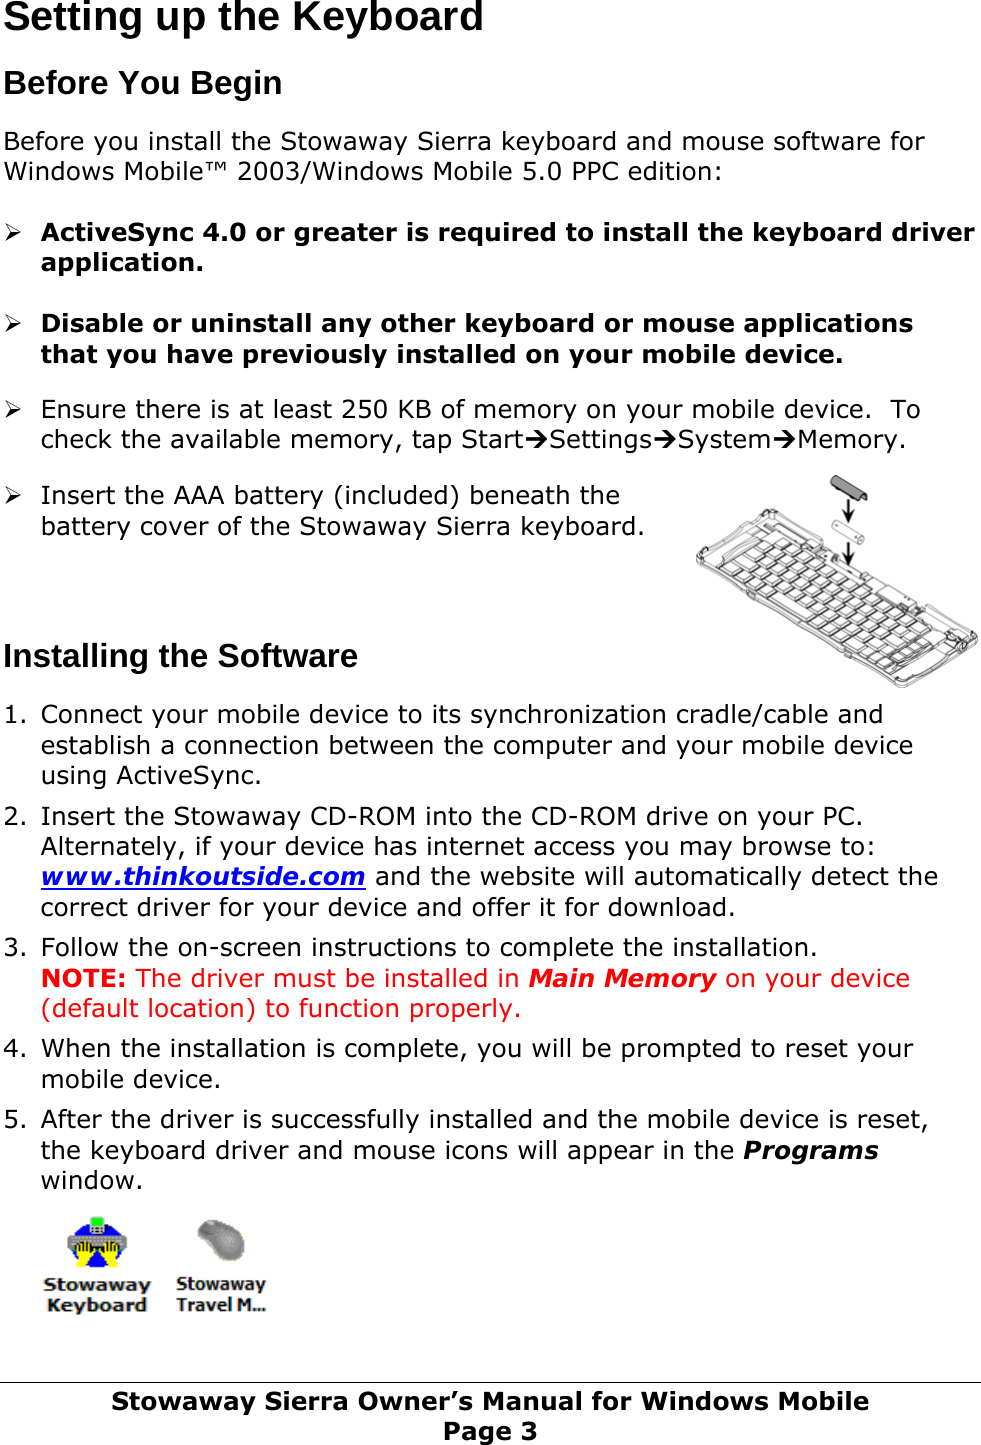 Setting up the Keyboard  Before You Begin  Before you install the Stowaway Sierra keyboard and mouse software for Windows Mobile™ 2003/Windows Mobile 5.0 PPC edition:  ¾ ActiveSync 4.0 or greater is required to install the keyboard driver application.   ¾ Disable or uninstall any other keyboard or mouse applications that you have previously installed on your mobile device.   ¾ Ensure there is at least 250 KB of memory on your mobile device.  To check the available memory, tap Start¼Settings¼System¼Memory.    ¾ Insert the AAA battery (included) beneath the battery cover of the Stowaway Sierra keyboard.     Installing the Software  1. Connect your mobile device to its synchronization cradle/cable and establish a connection between the computer and your mobile device using ActiveSync.  2. Insert the Stowaway CD-ROM into the CD-ROM drive on your PC. Alternately, if your device has internet access you may browse to: www.thinkoutside.com and the website will automatically detect the correct driver for your device and offer it for download.  3. Follow the on-screen instructions to complete the installation. NOTE: The driver must be installed in Main Memory on your device (default location) to function properly.  4. When the installation is complete, you will be prompted to reset your mobile device.  5. After the driver is successfully installed and the mobile device is reset, the keyboard driver and mouse icons will appear in the Programs window.      Stowaway Sierra Owner’s Manual for Windows Mobile Page 3 